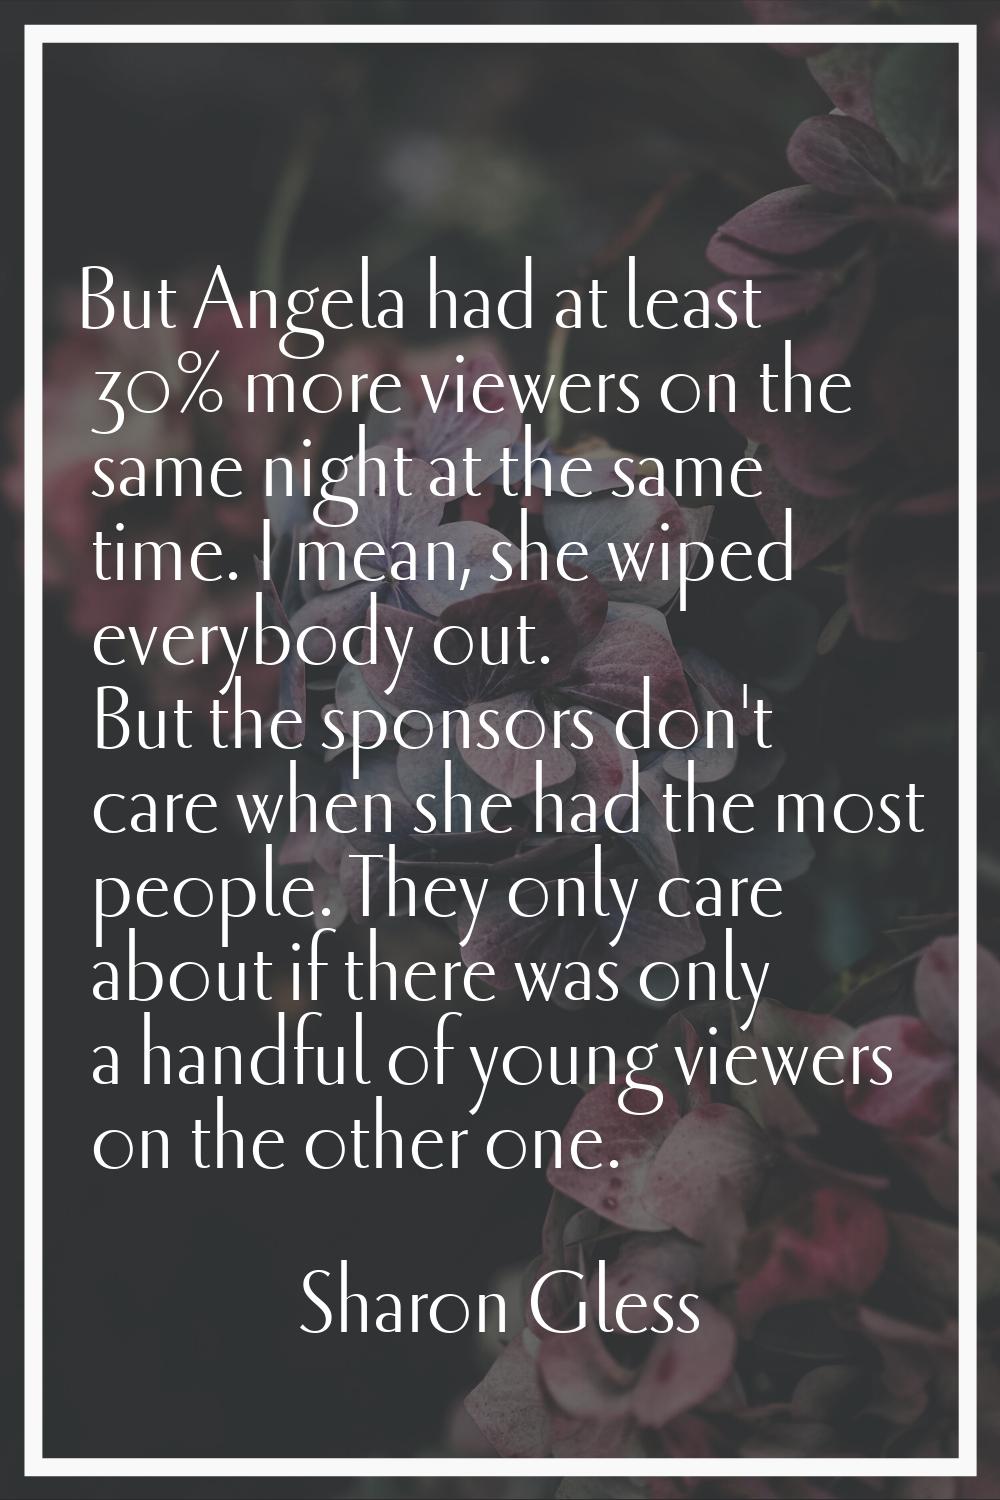 But Angela had at least 30% more viewers on the same night at the same time. I mean, she wiped ever